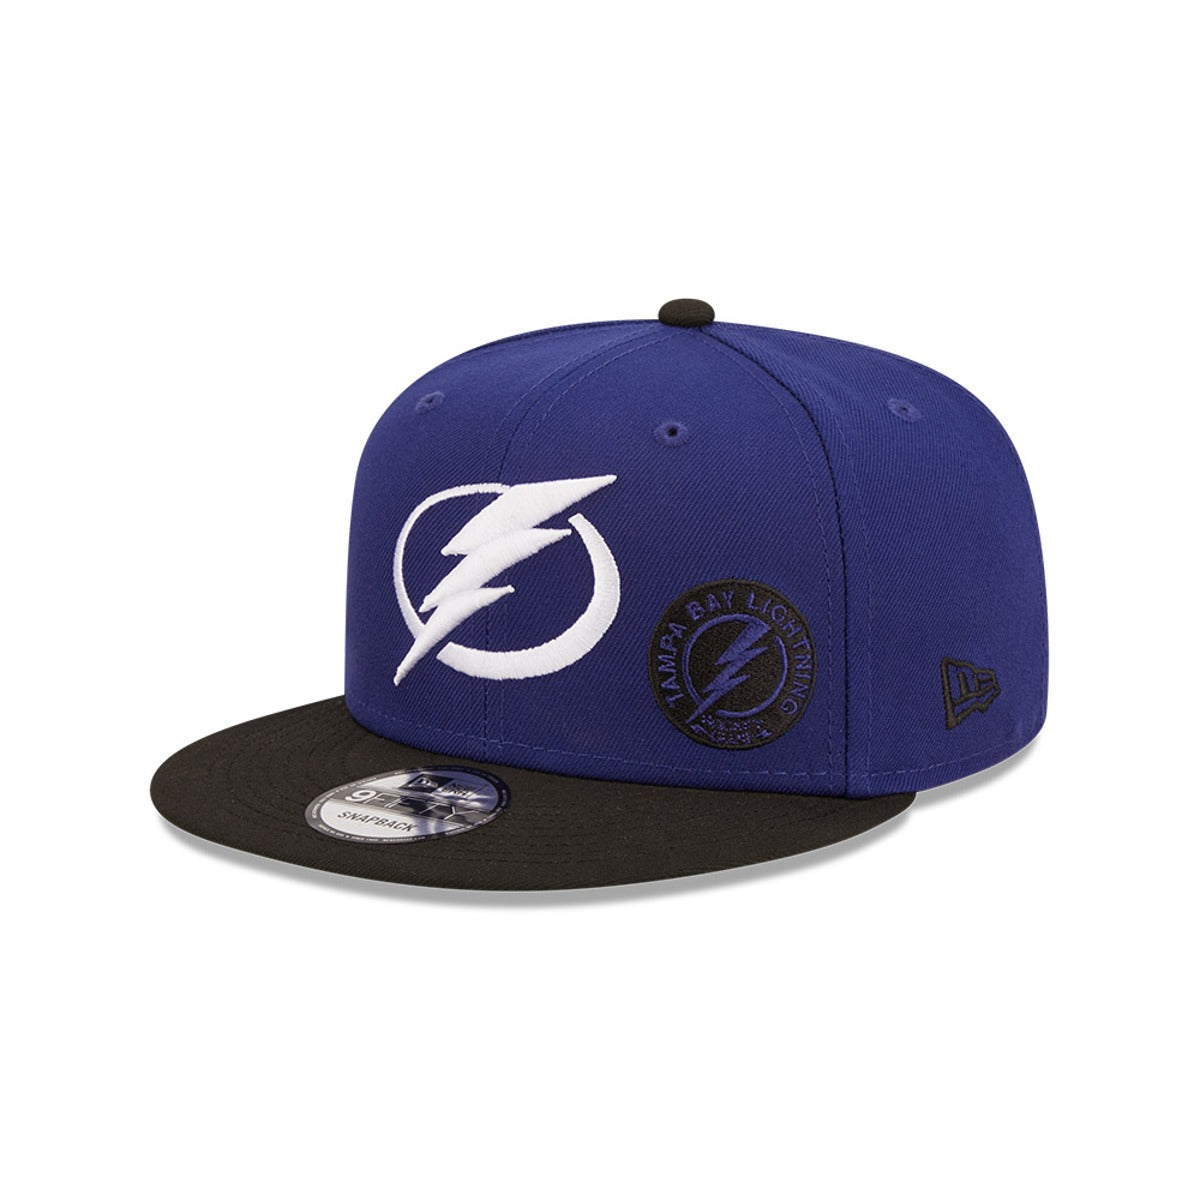 Tampa Bay Lightning New Era 9Fifty Adjustable Snap Back League Flawless Hat